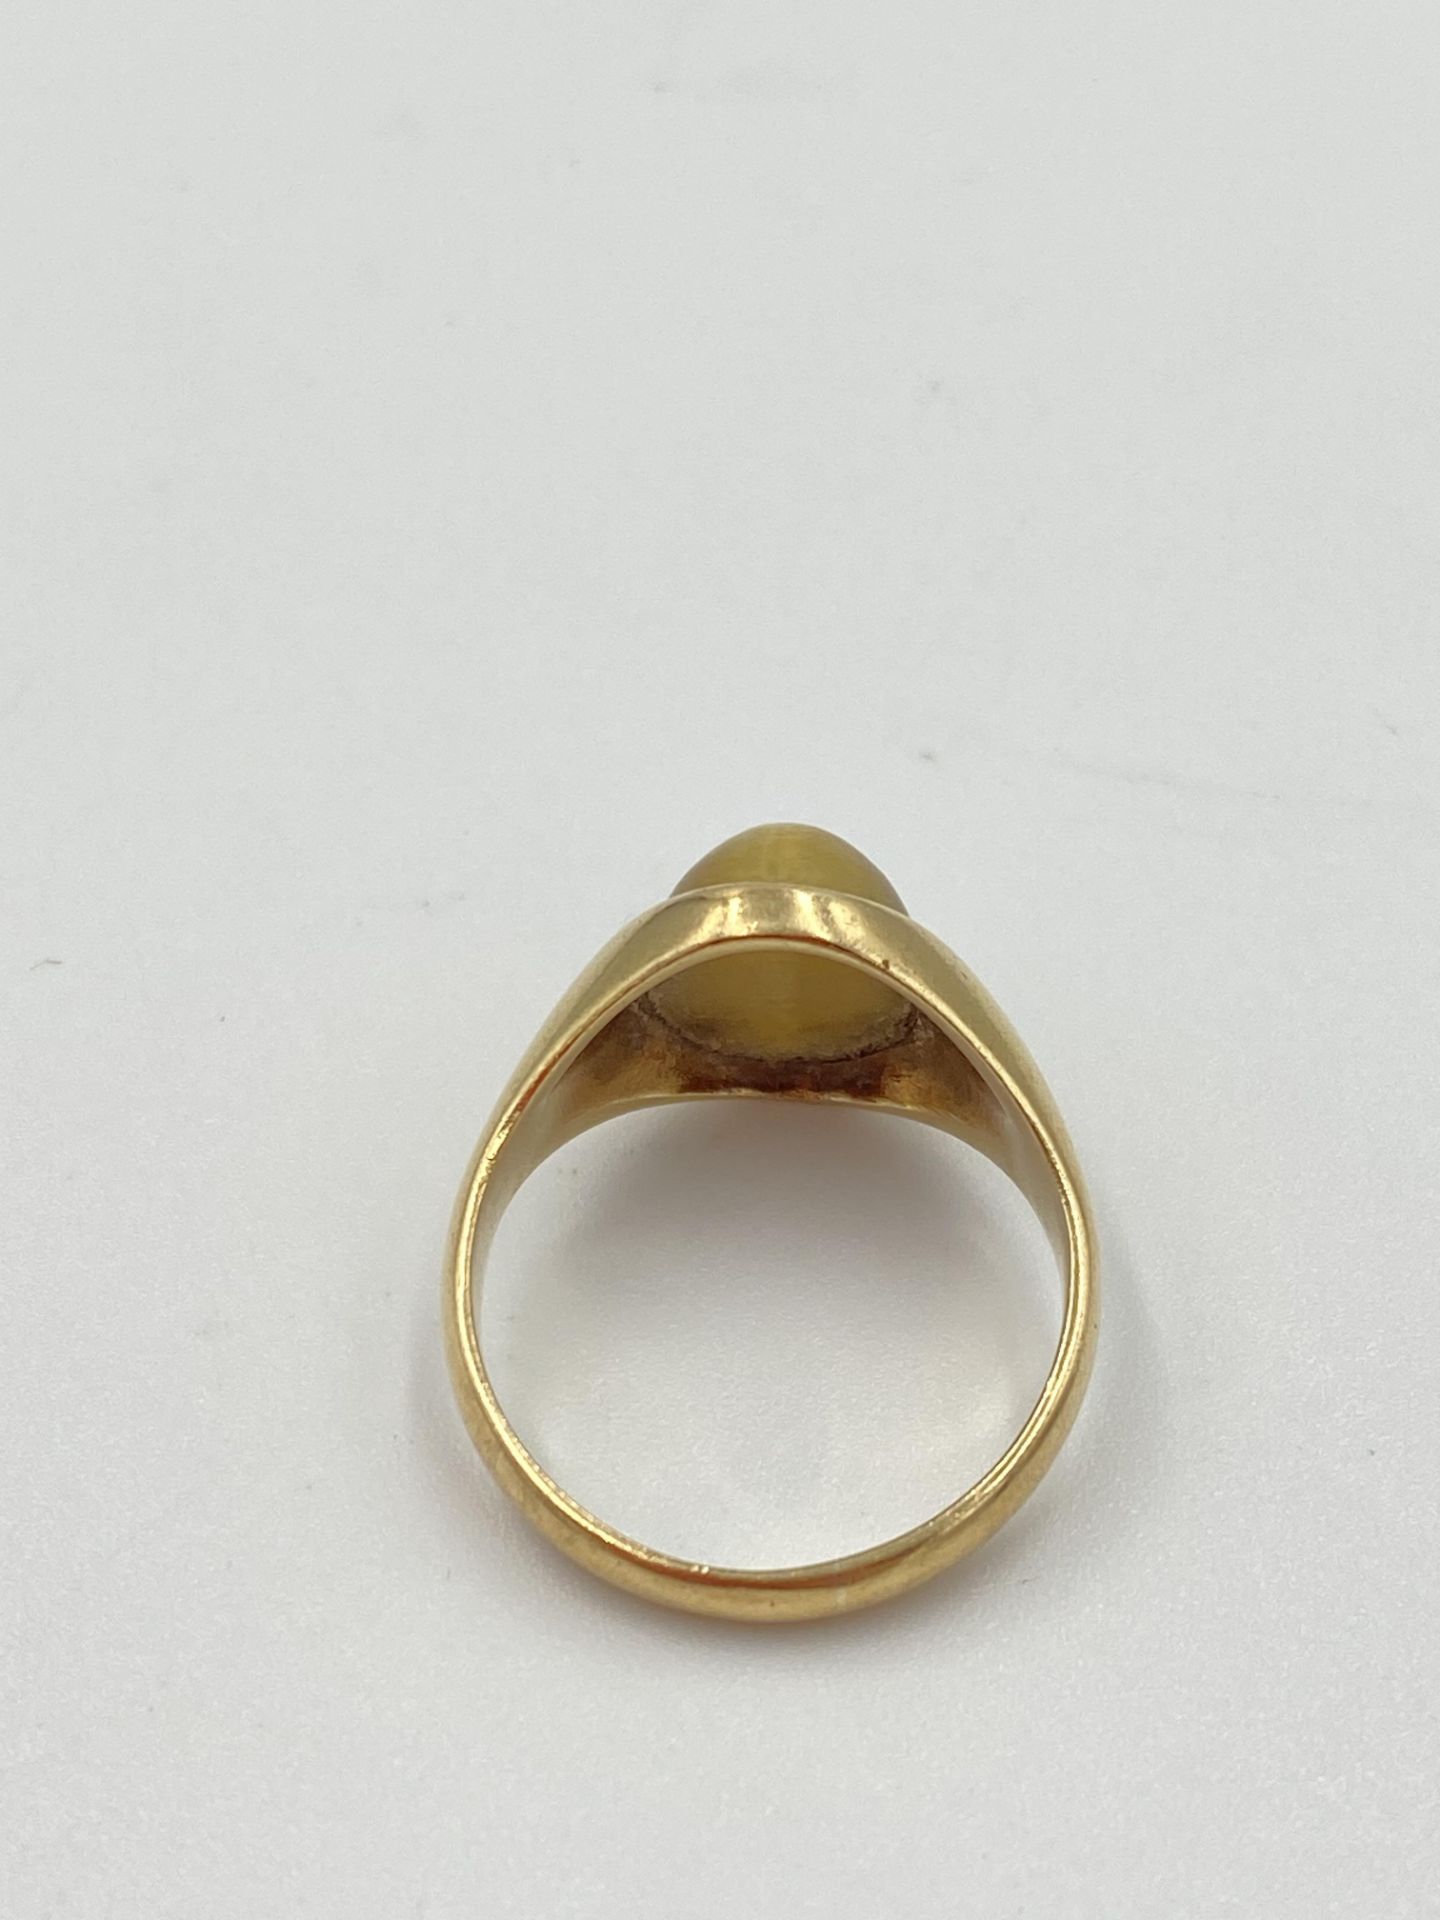 9ct gold and agate ring - Image 3 of 4